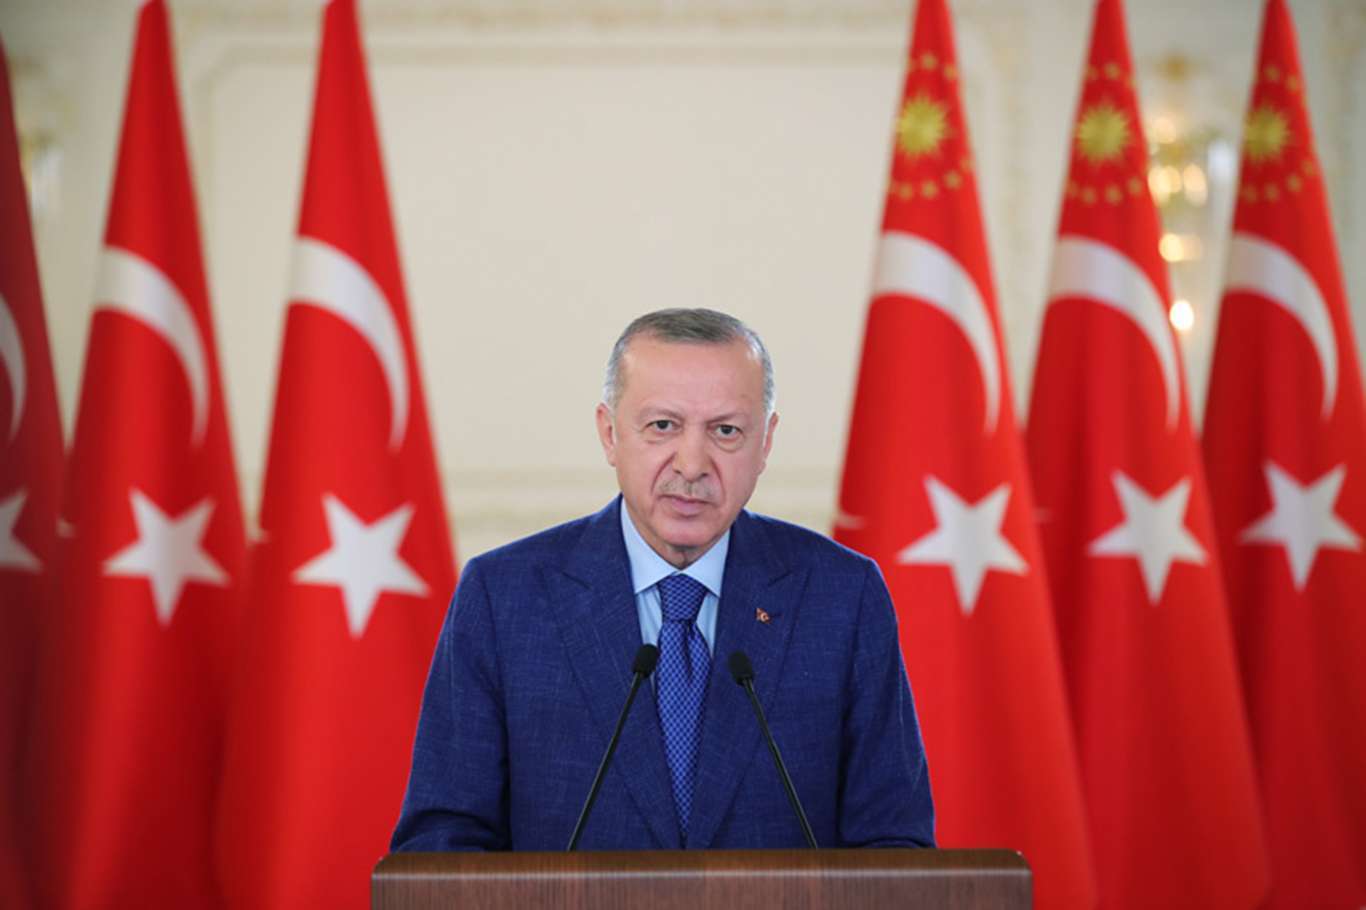 Erdoğan: COVID-19 crisis has presented great opportunities for Turkey